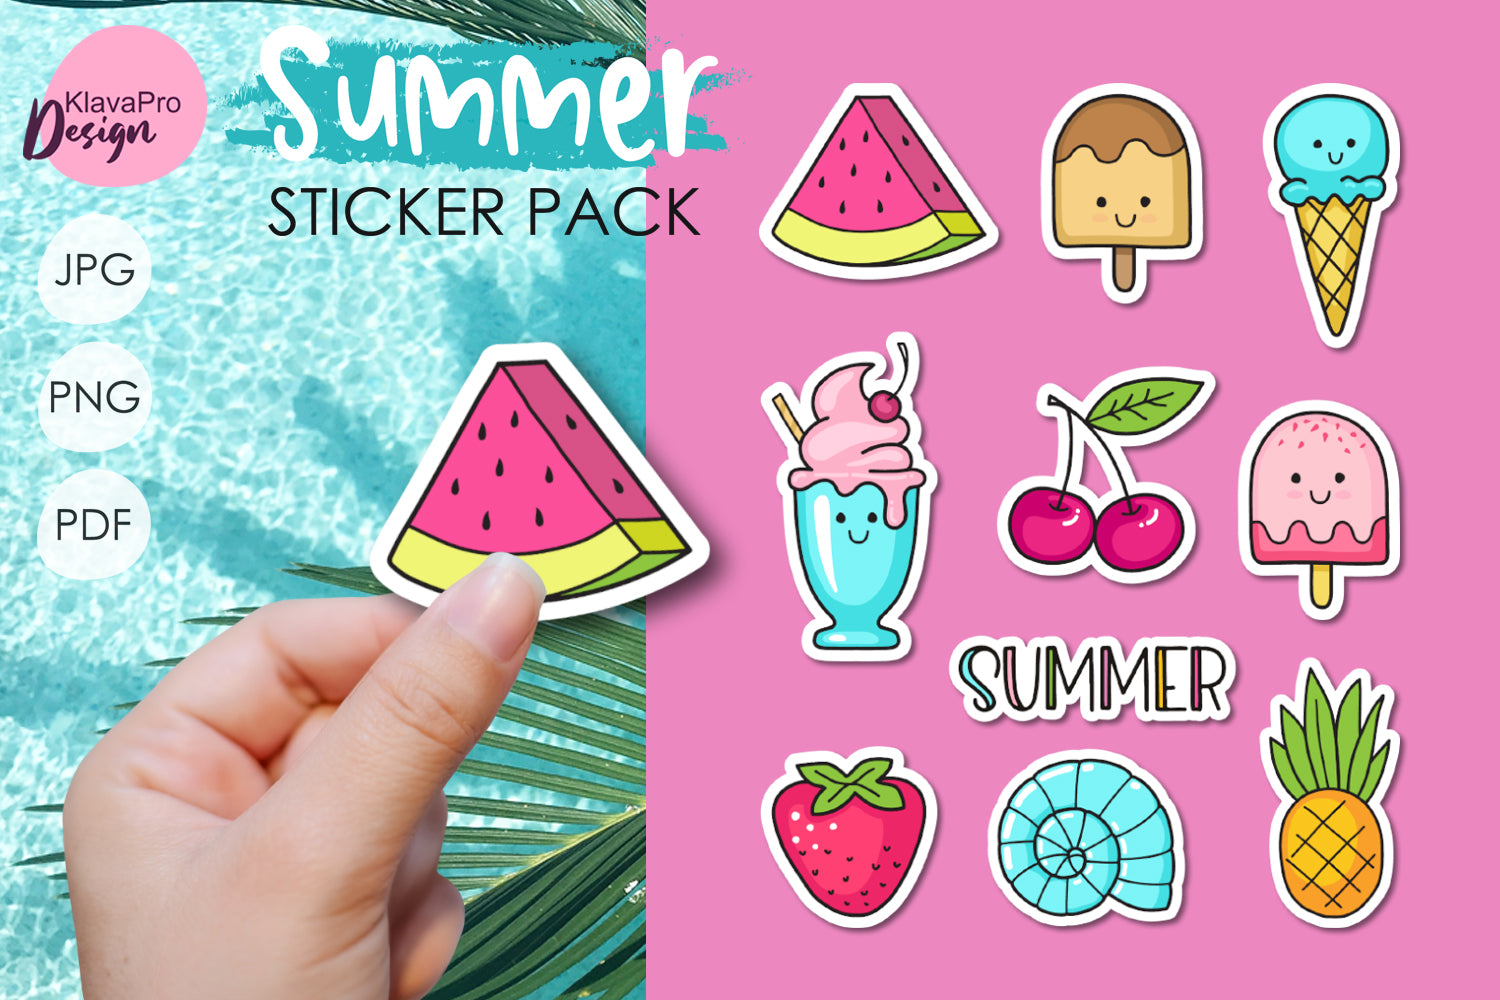 Pink Be Kind Aesthetic Sticker Pack | Photographic Print